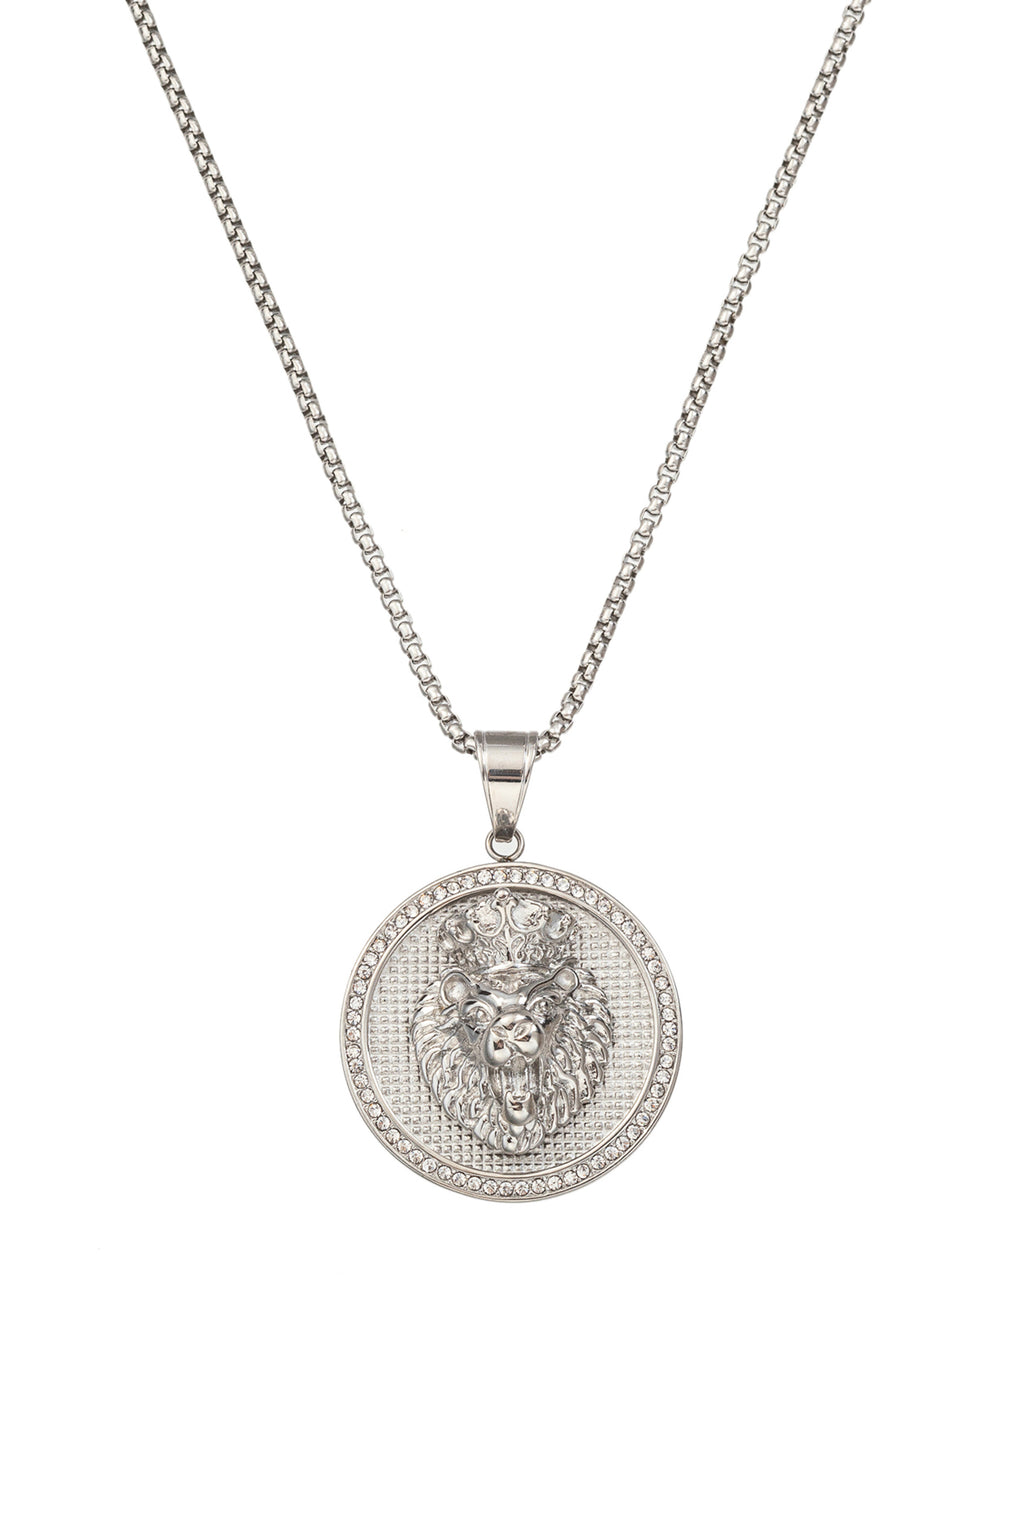 Silver tone titanium lion head pendant necklace studded with CZ crystals.